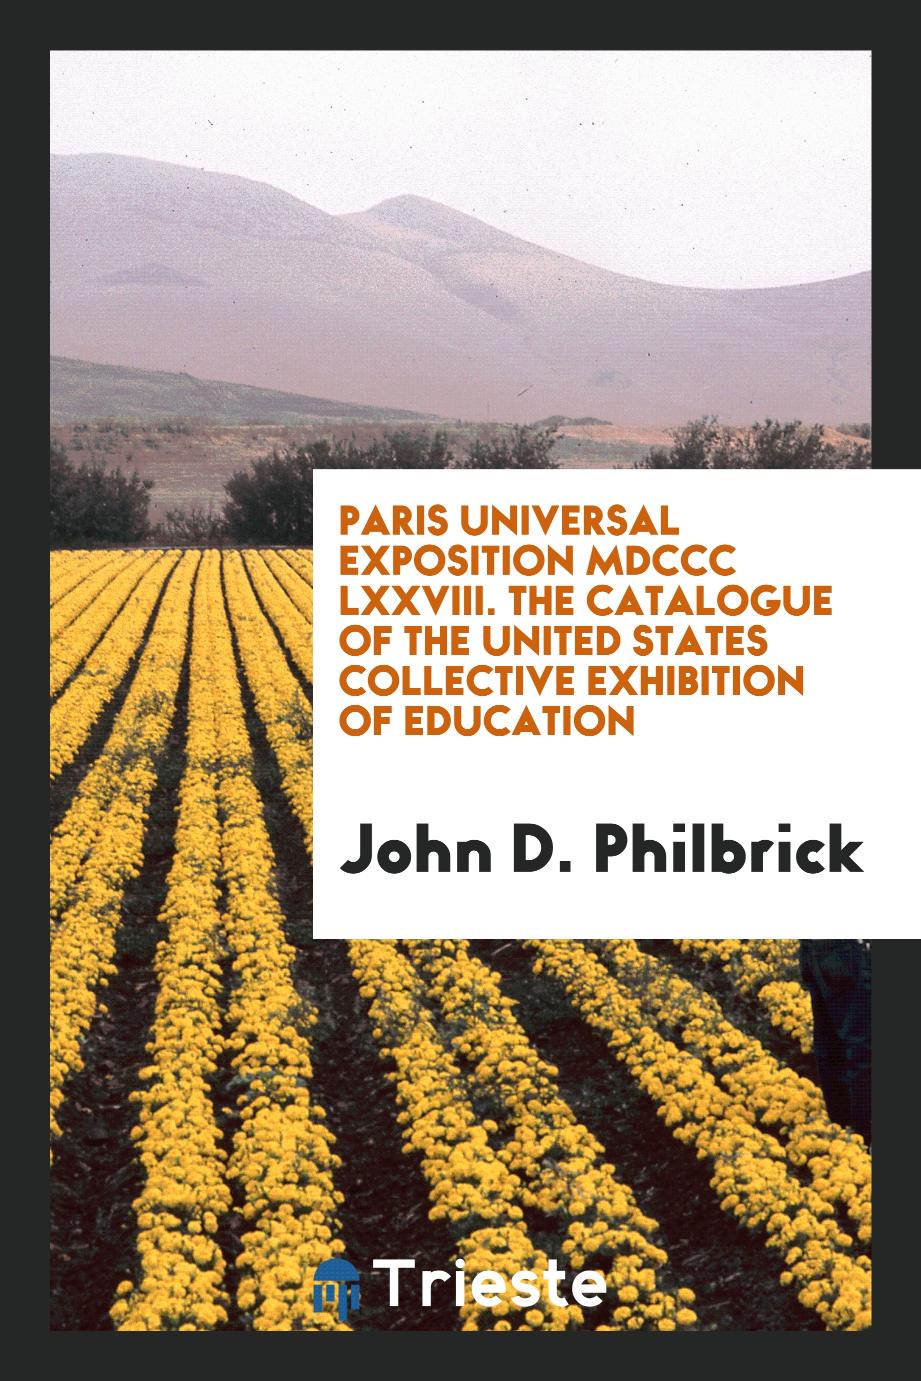 Paris Universal Exposition MDCCC LXXVIII. The Catalogue of the United States Collective Exhibition of Education